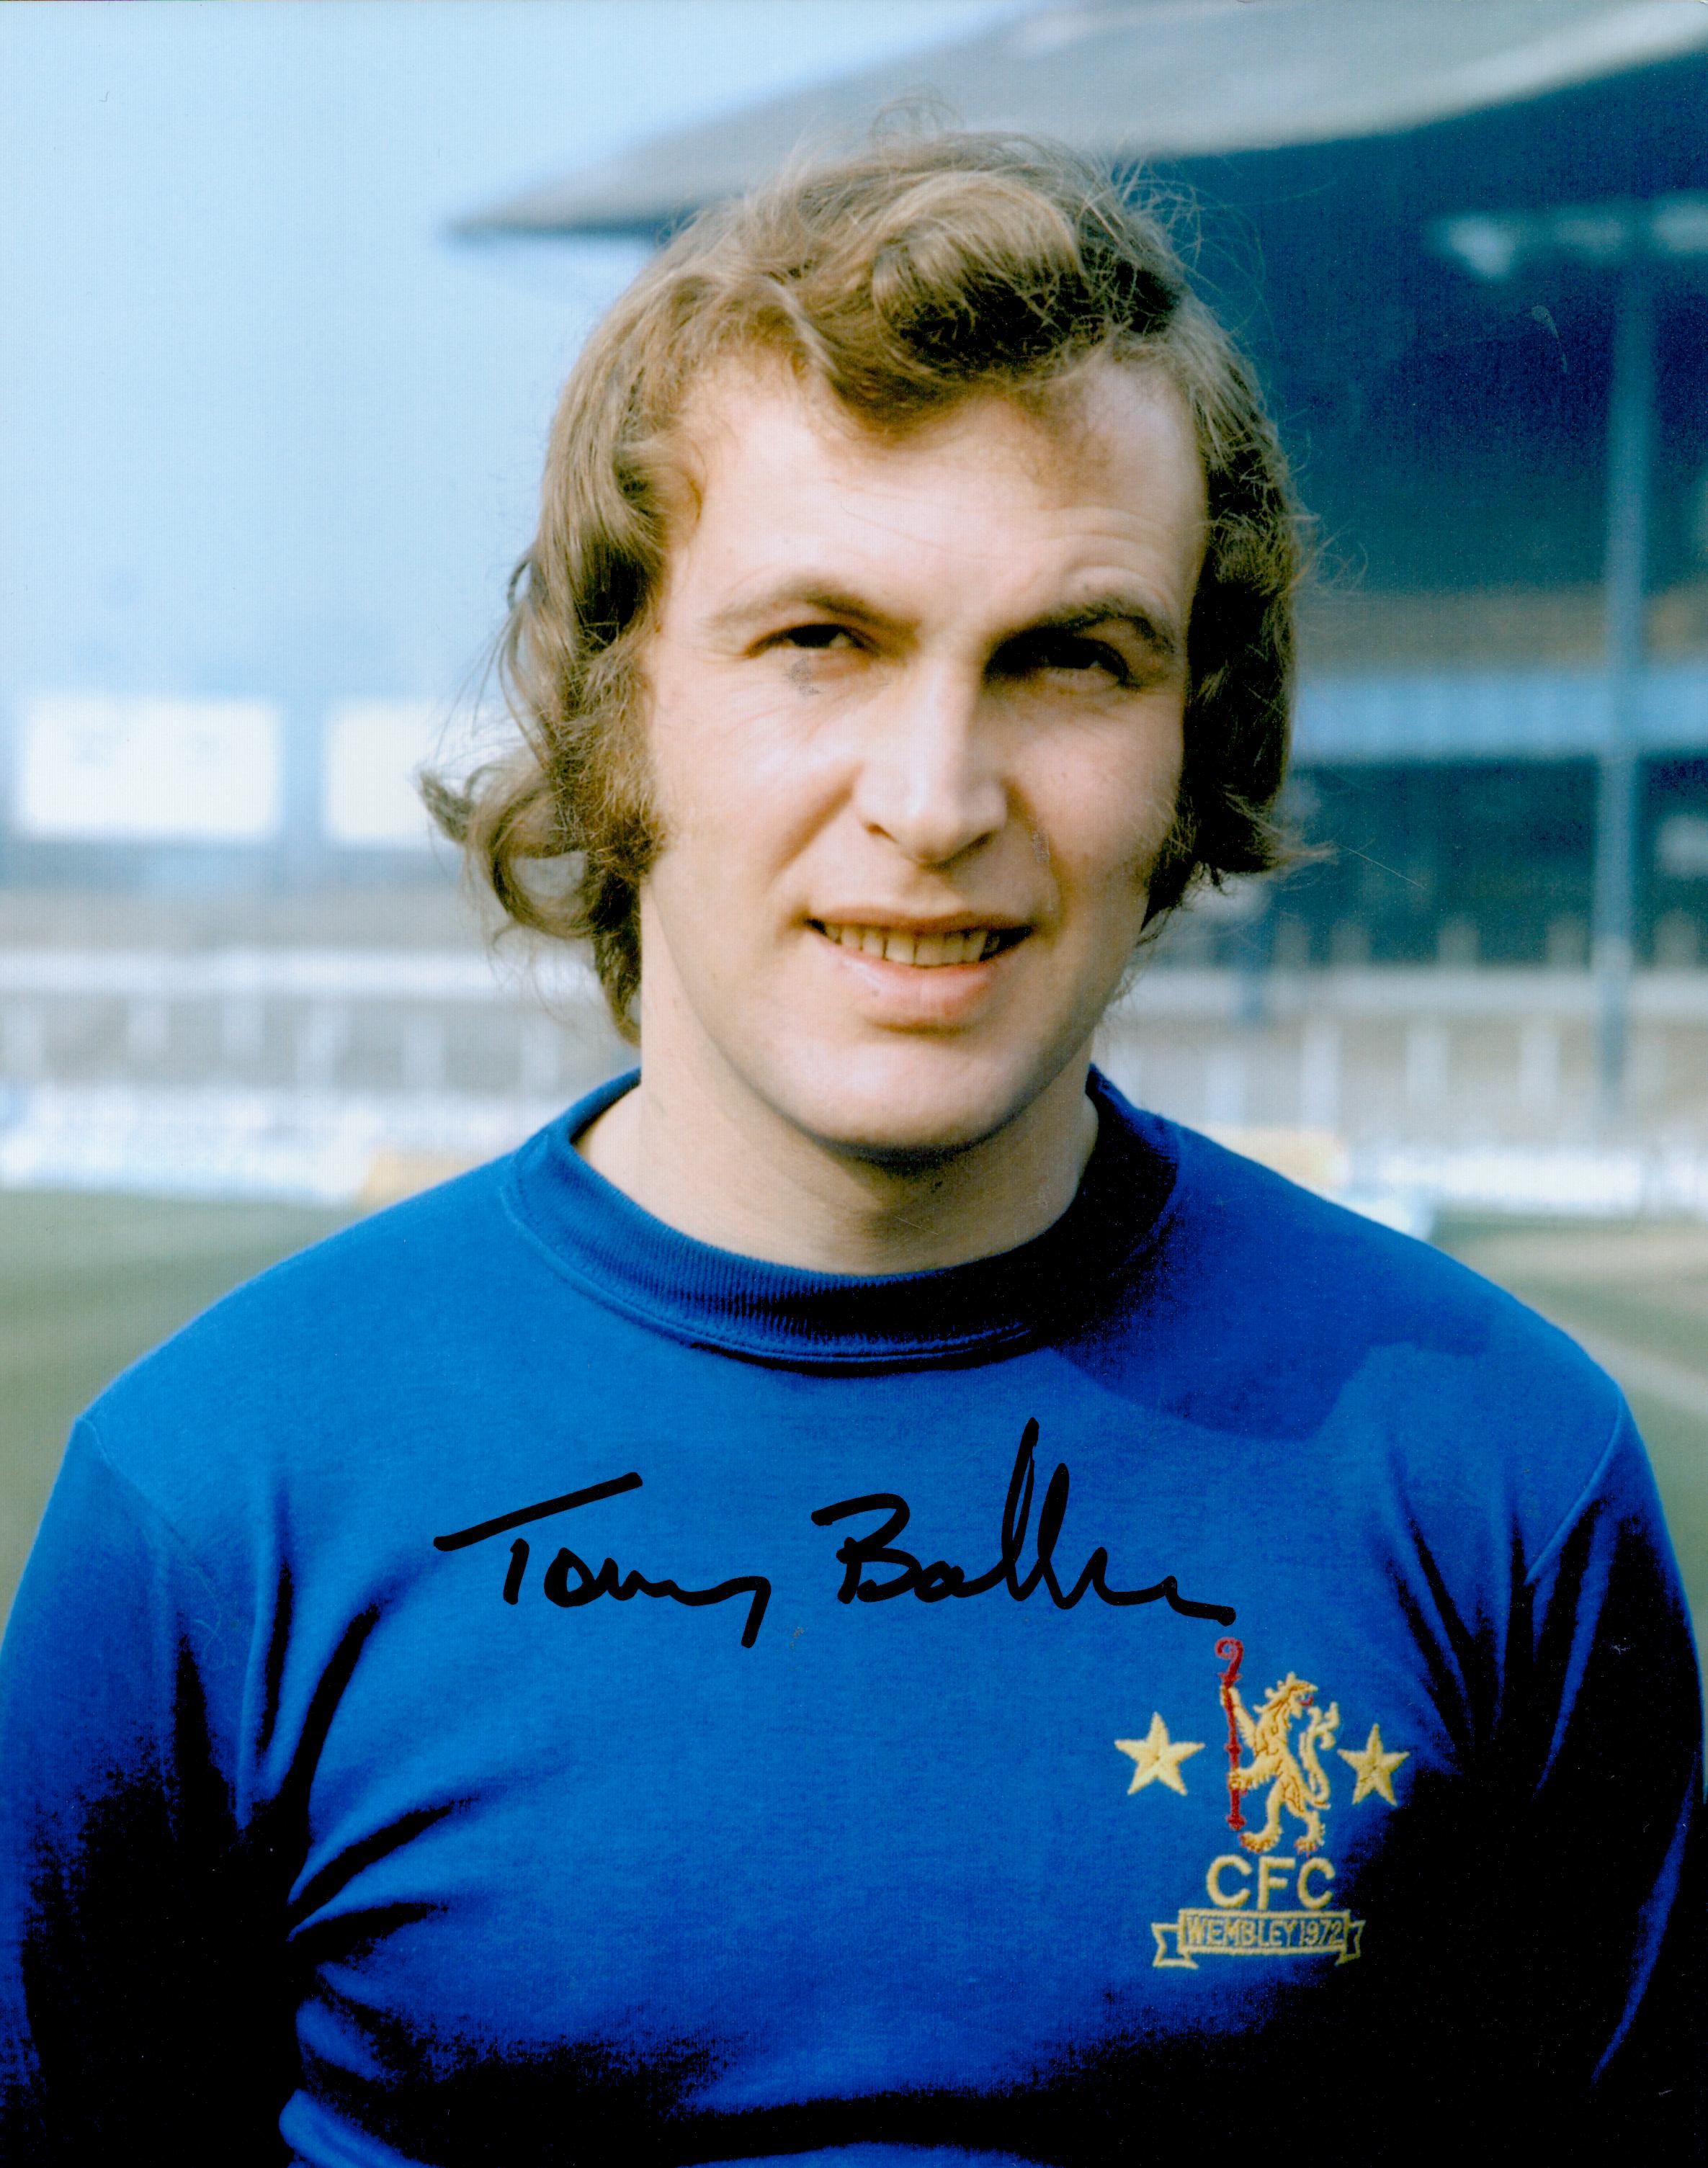 Tony Baldwin former British footballer who played for Arsenal Chelsea Millwall Manchester United